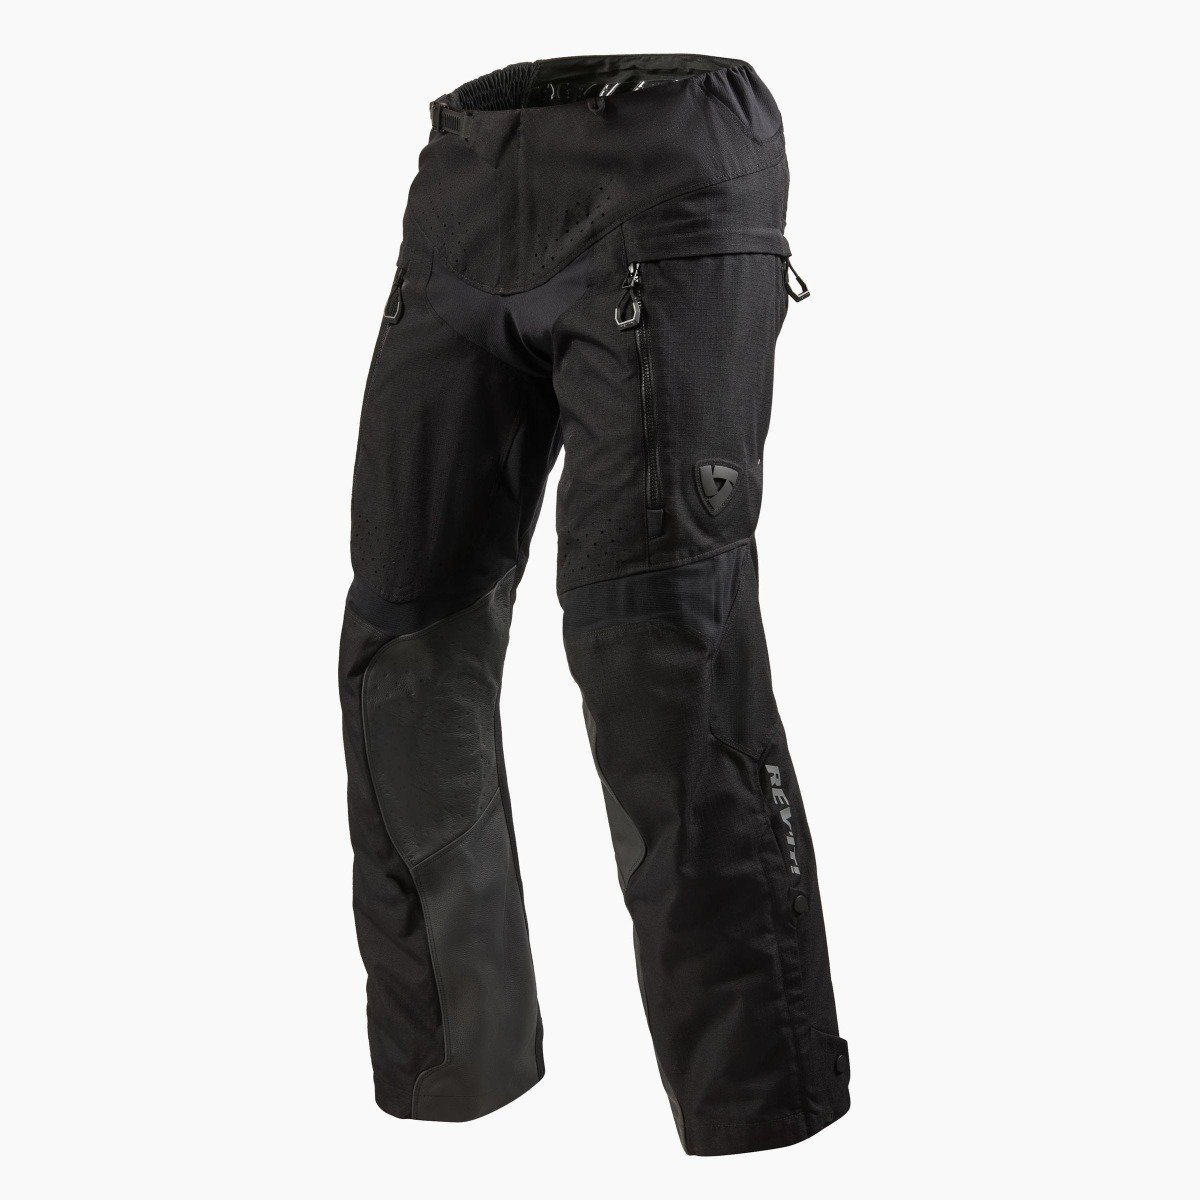 Image of REV'IT! Continent Black Motorcycle Pants Size L ID 8700001297042